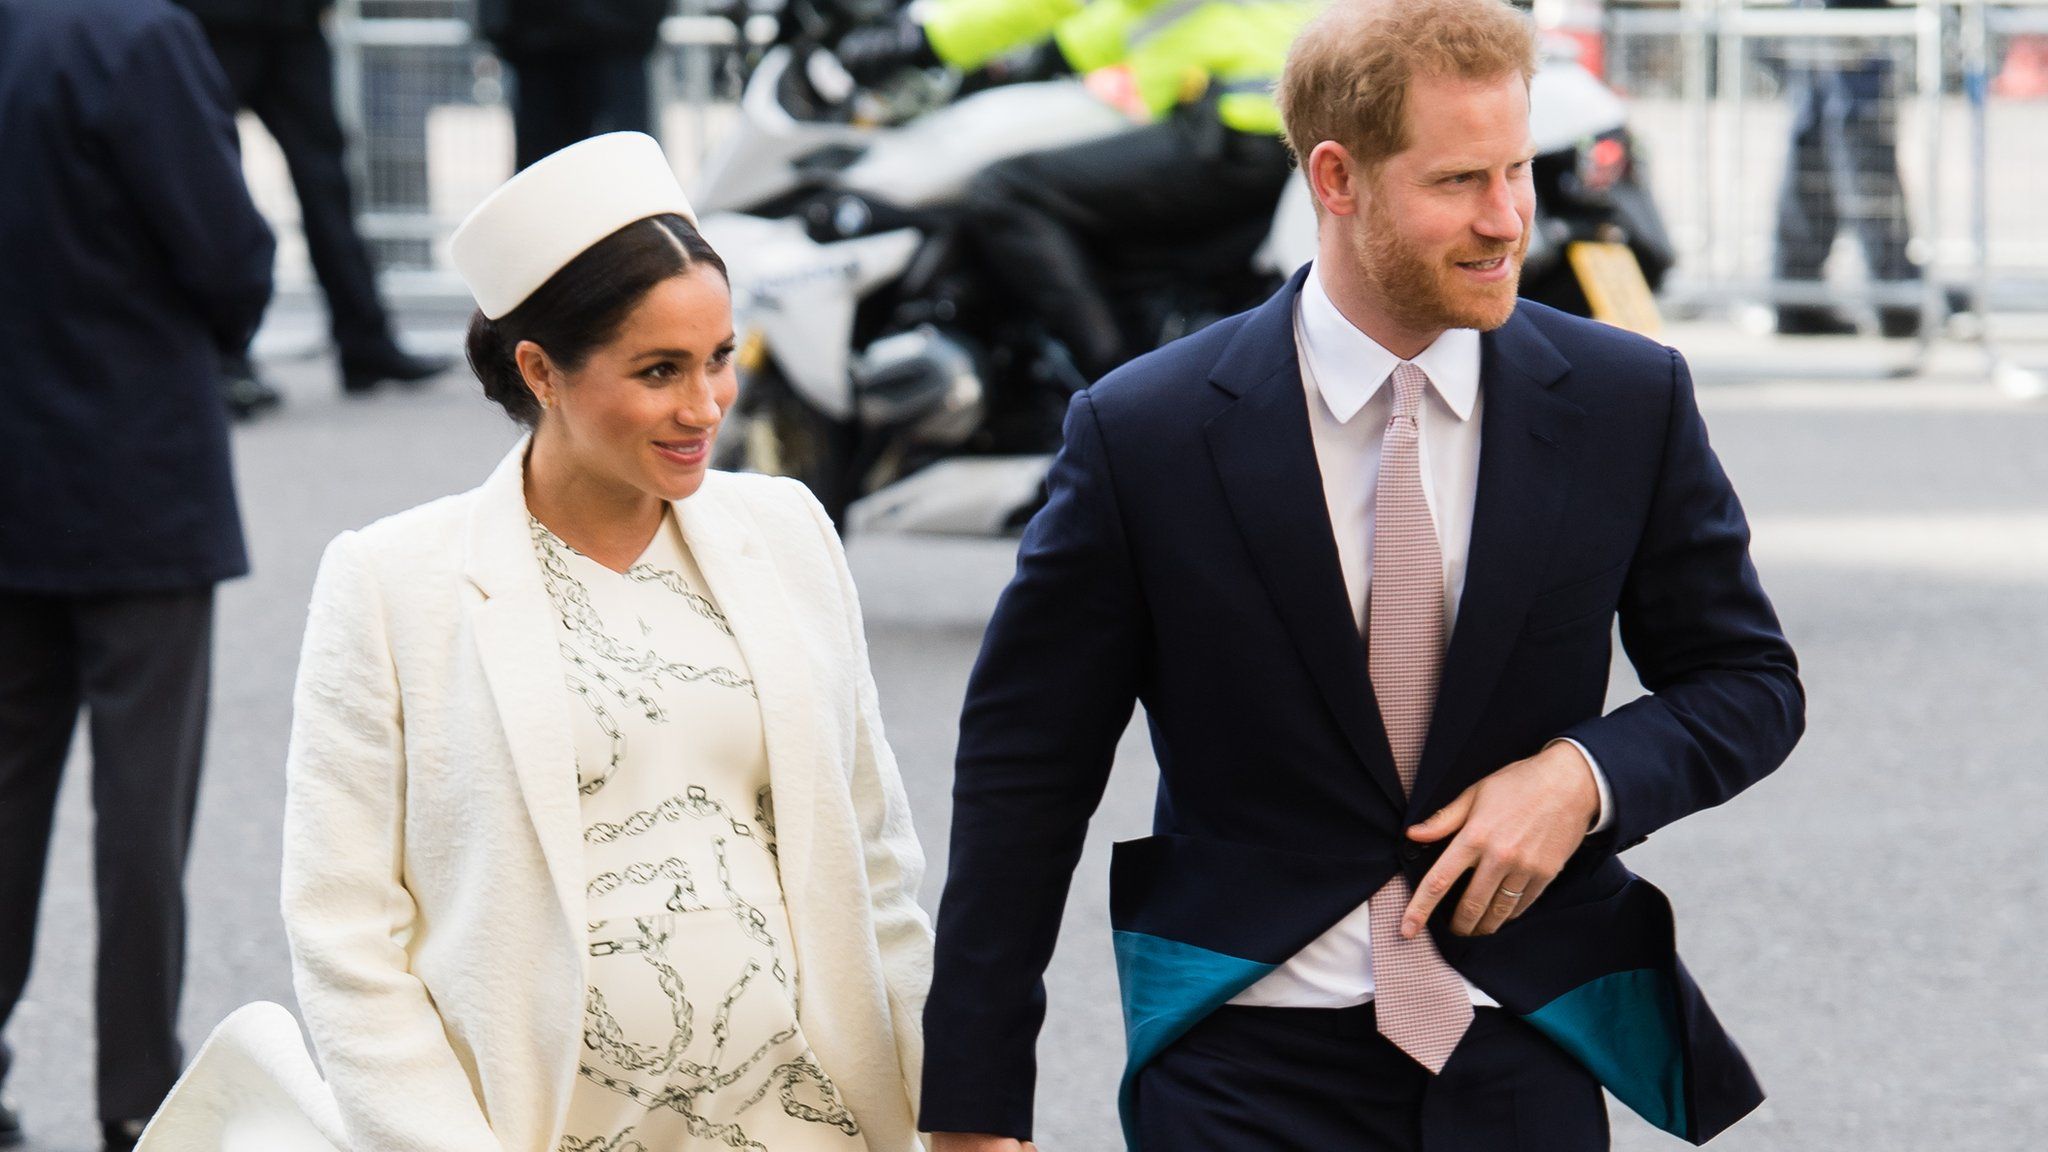 Prince Harry, Duke of Sussex and Meghan, Duchess of Sussex attend the Commonwealth Day service at Westminster Abbey on March 11, 2019 in London, England